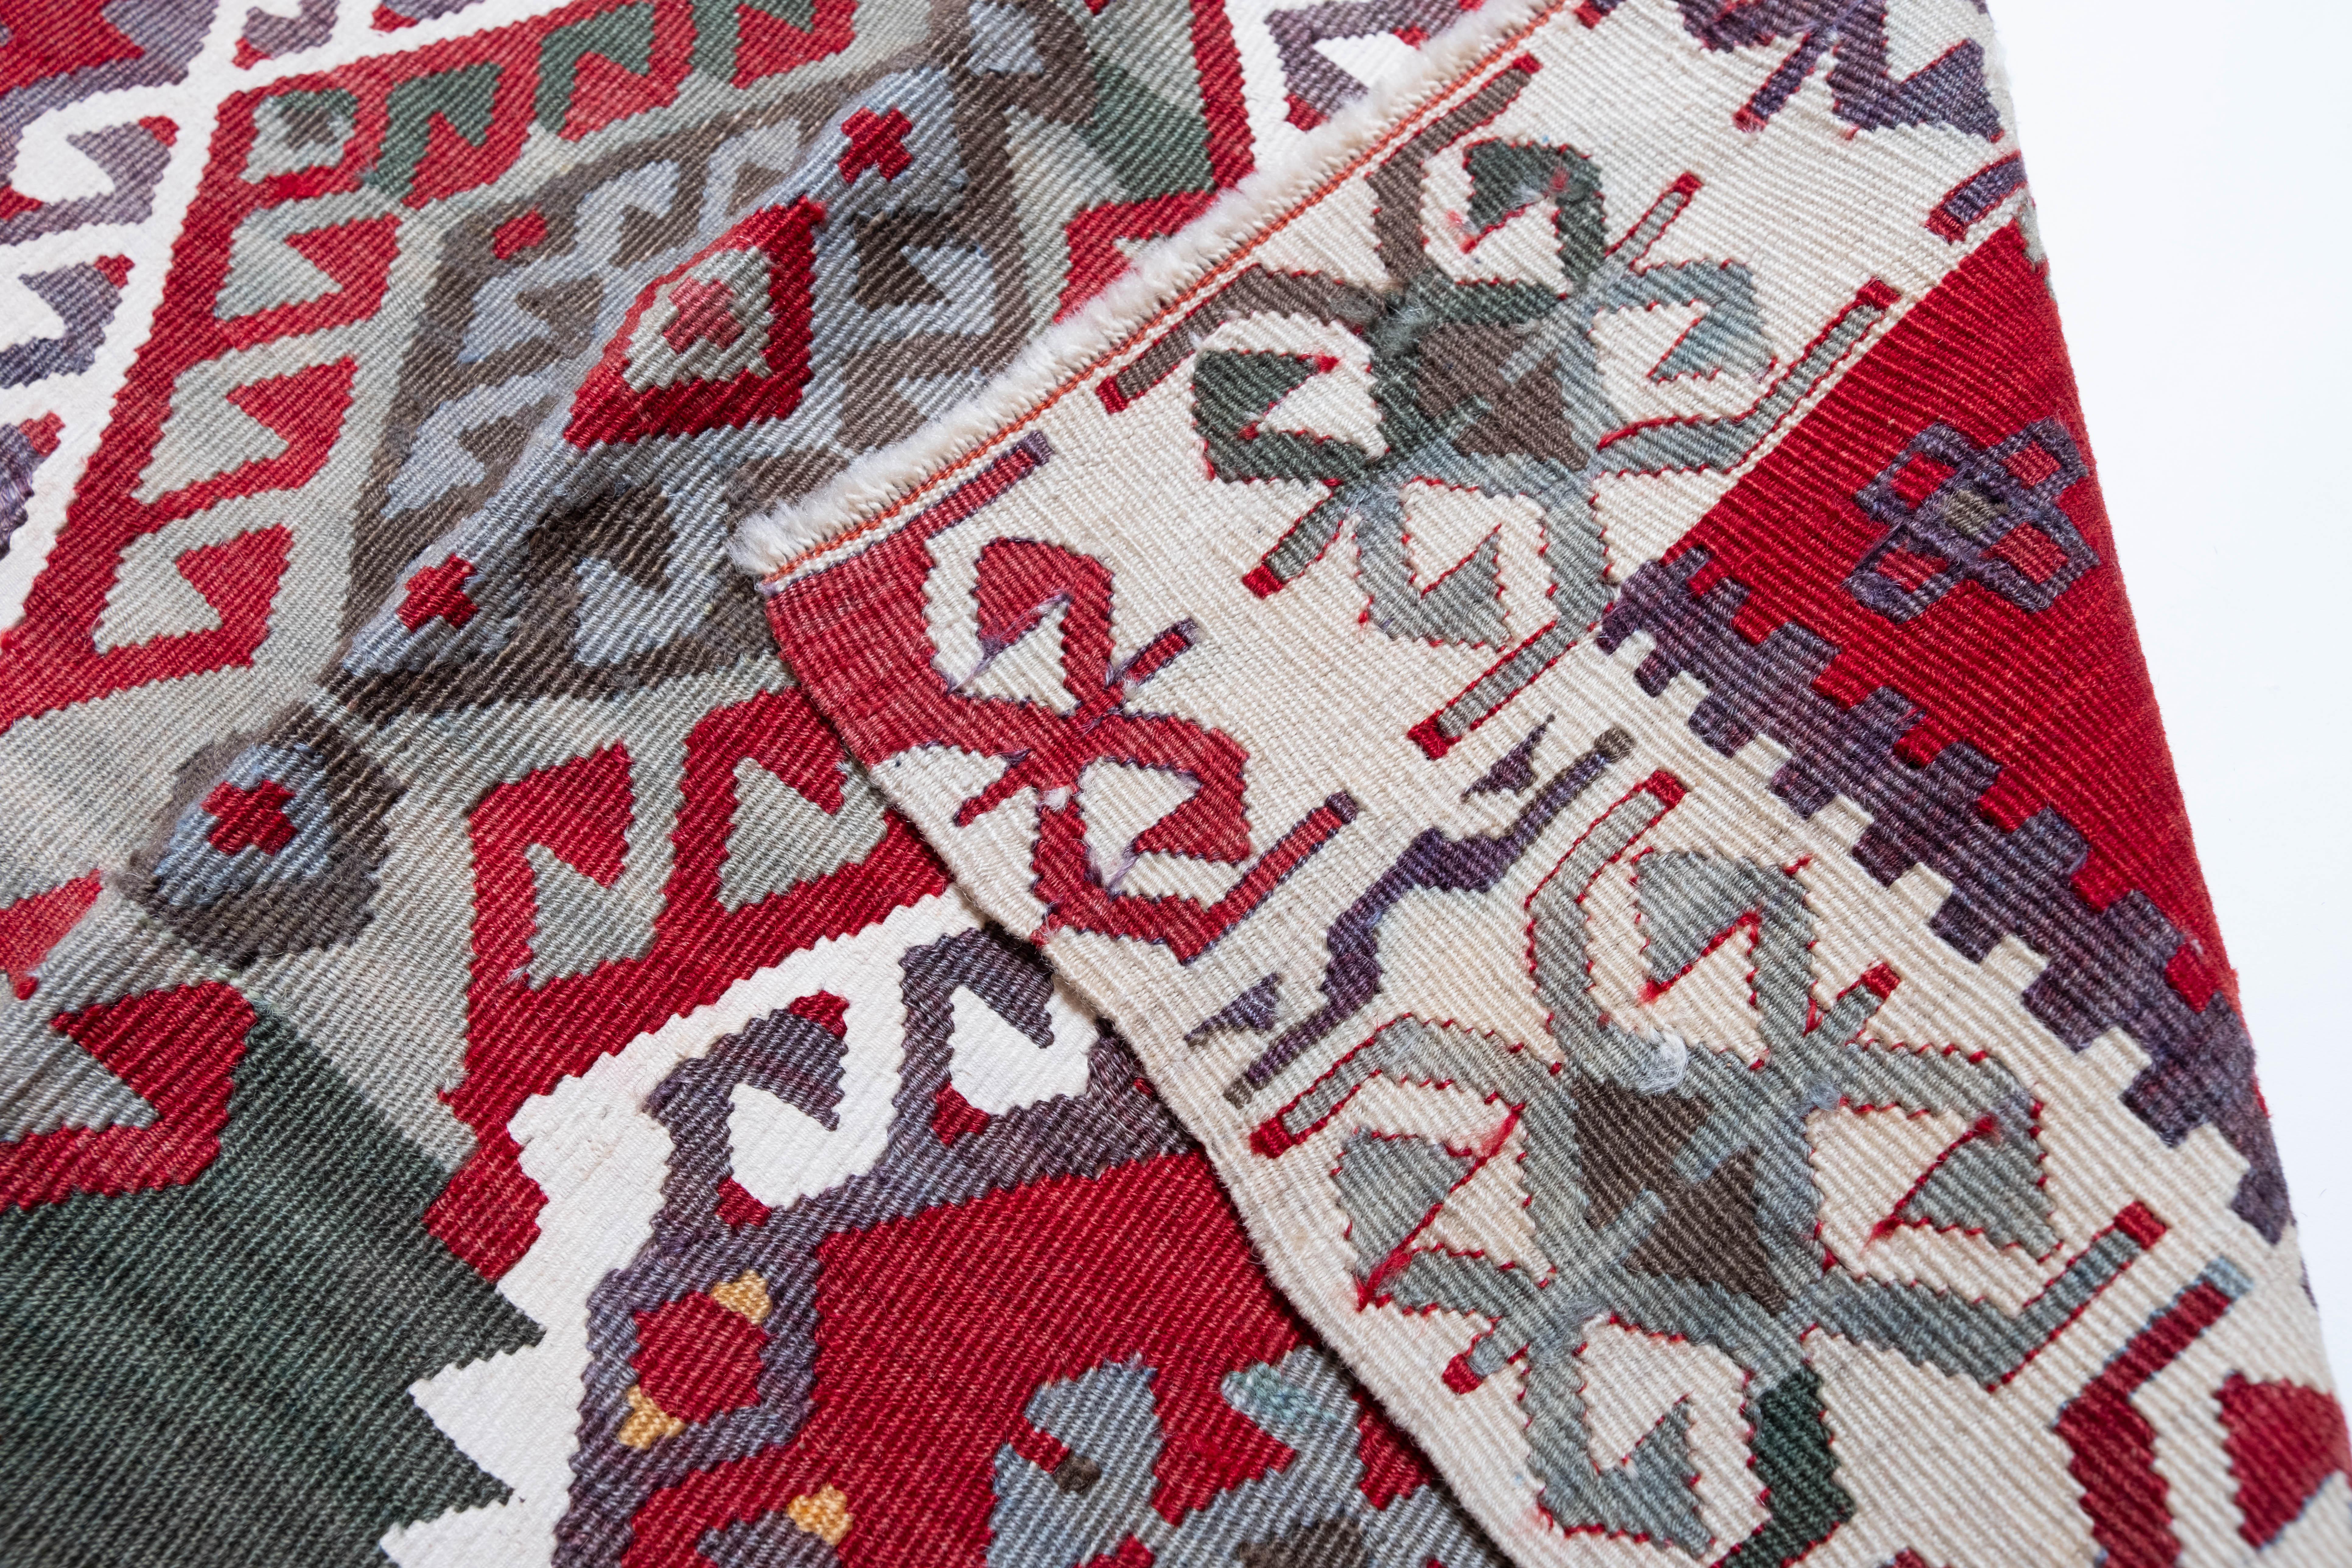 Hand-Woven Antique Cankiri Kilim Rug Wool Old Vintage Central Anatolian Turkish Carpet For Sale